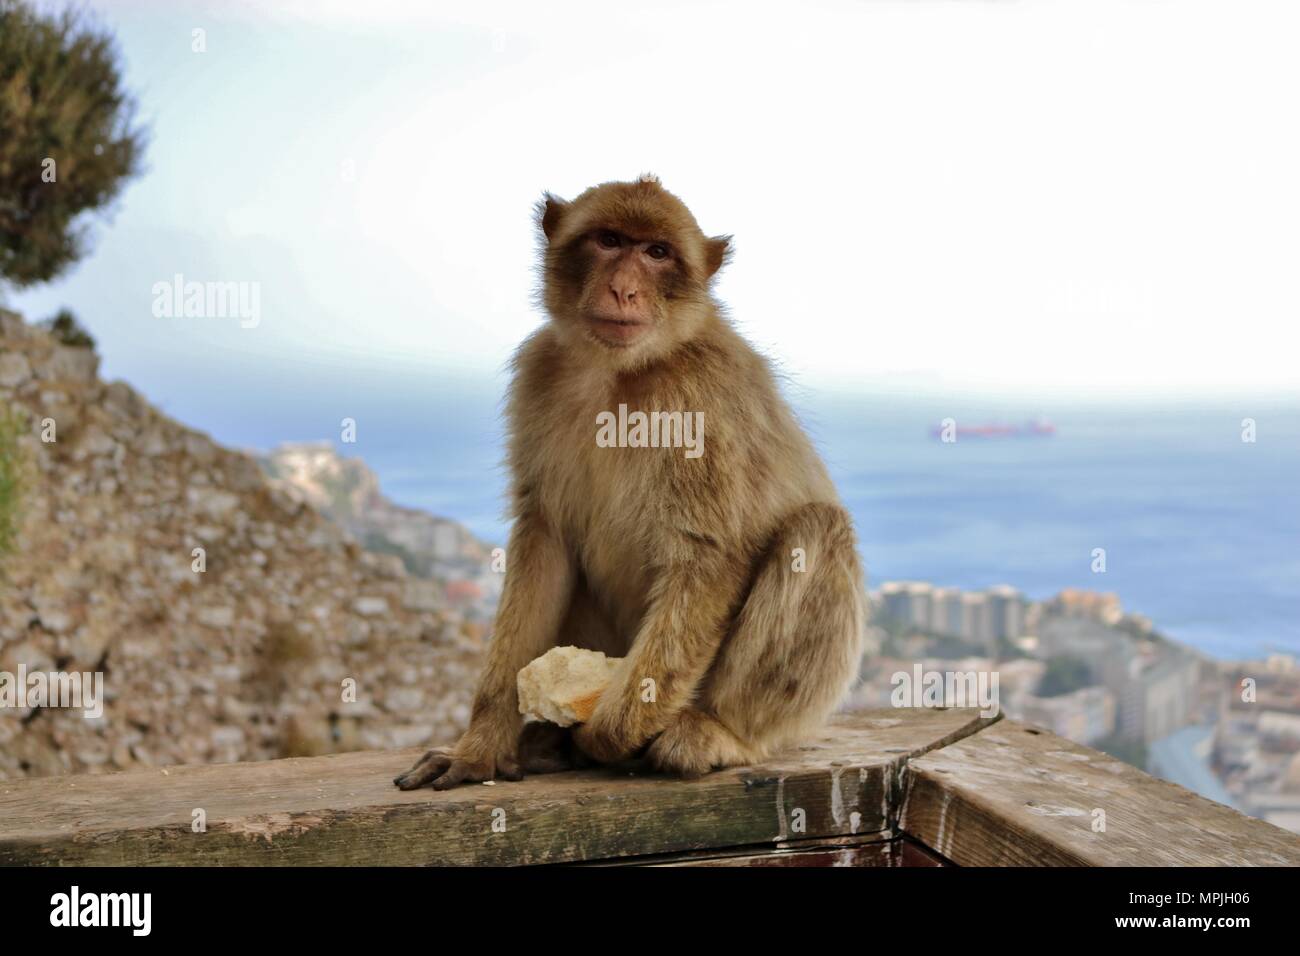 The Barbary Apes of The Rock of Gibraltar. The Barbary Macaque population in Gibraltar is the only wild monkey population in the European continent. Stock Photo